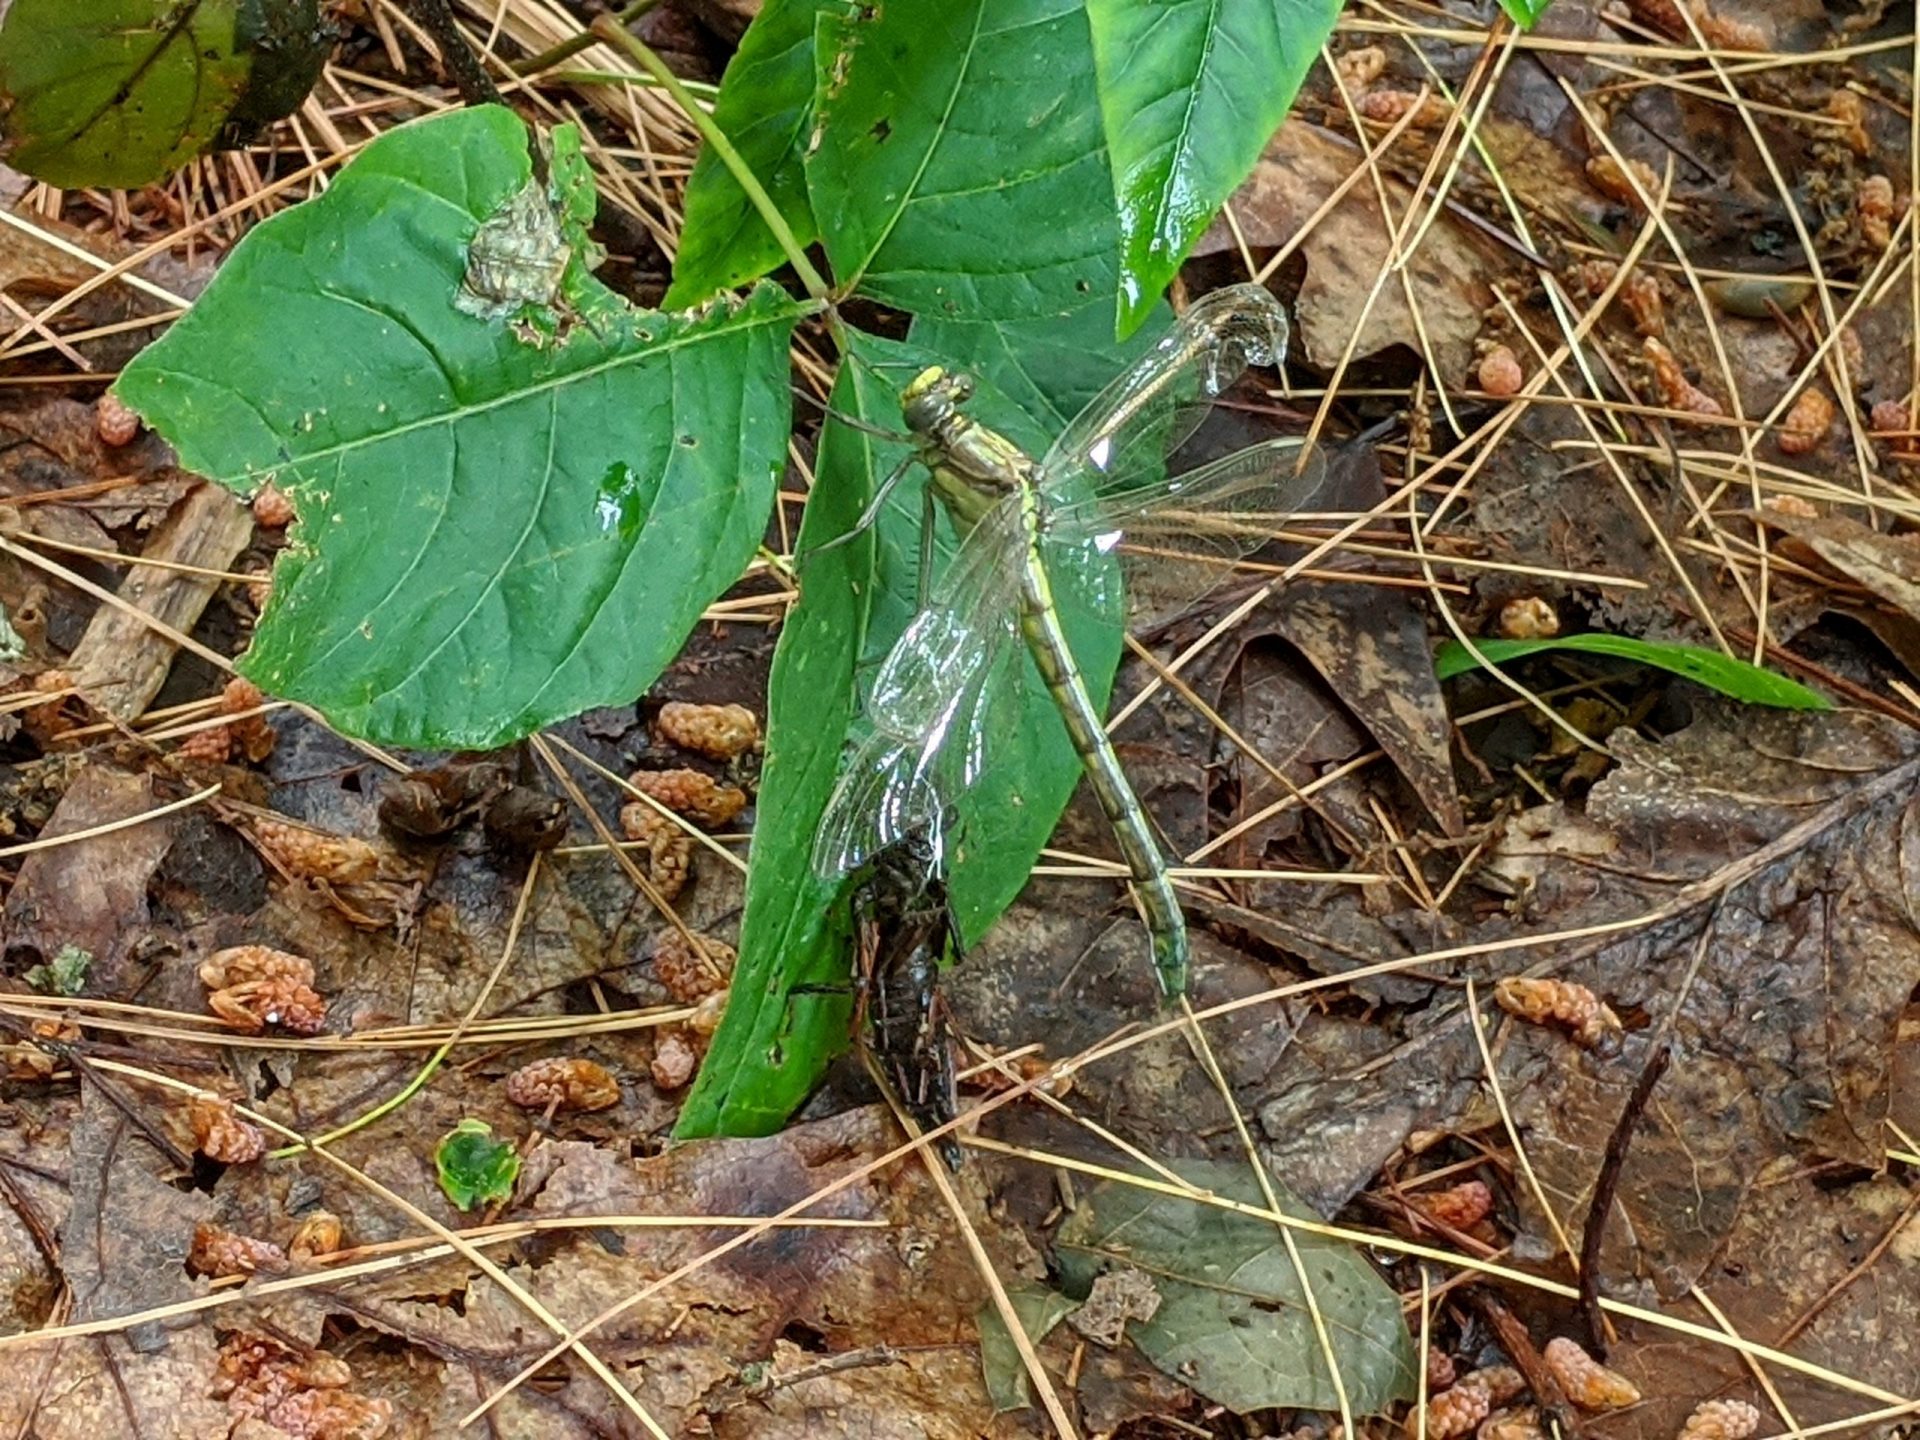 Molting dragonfly - June 2020 Ashland State Park